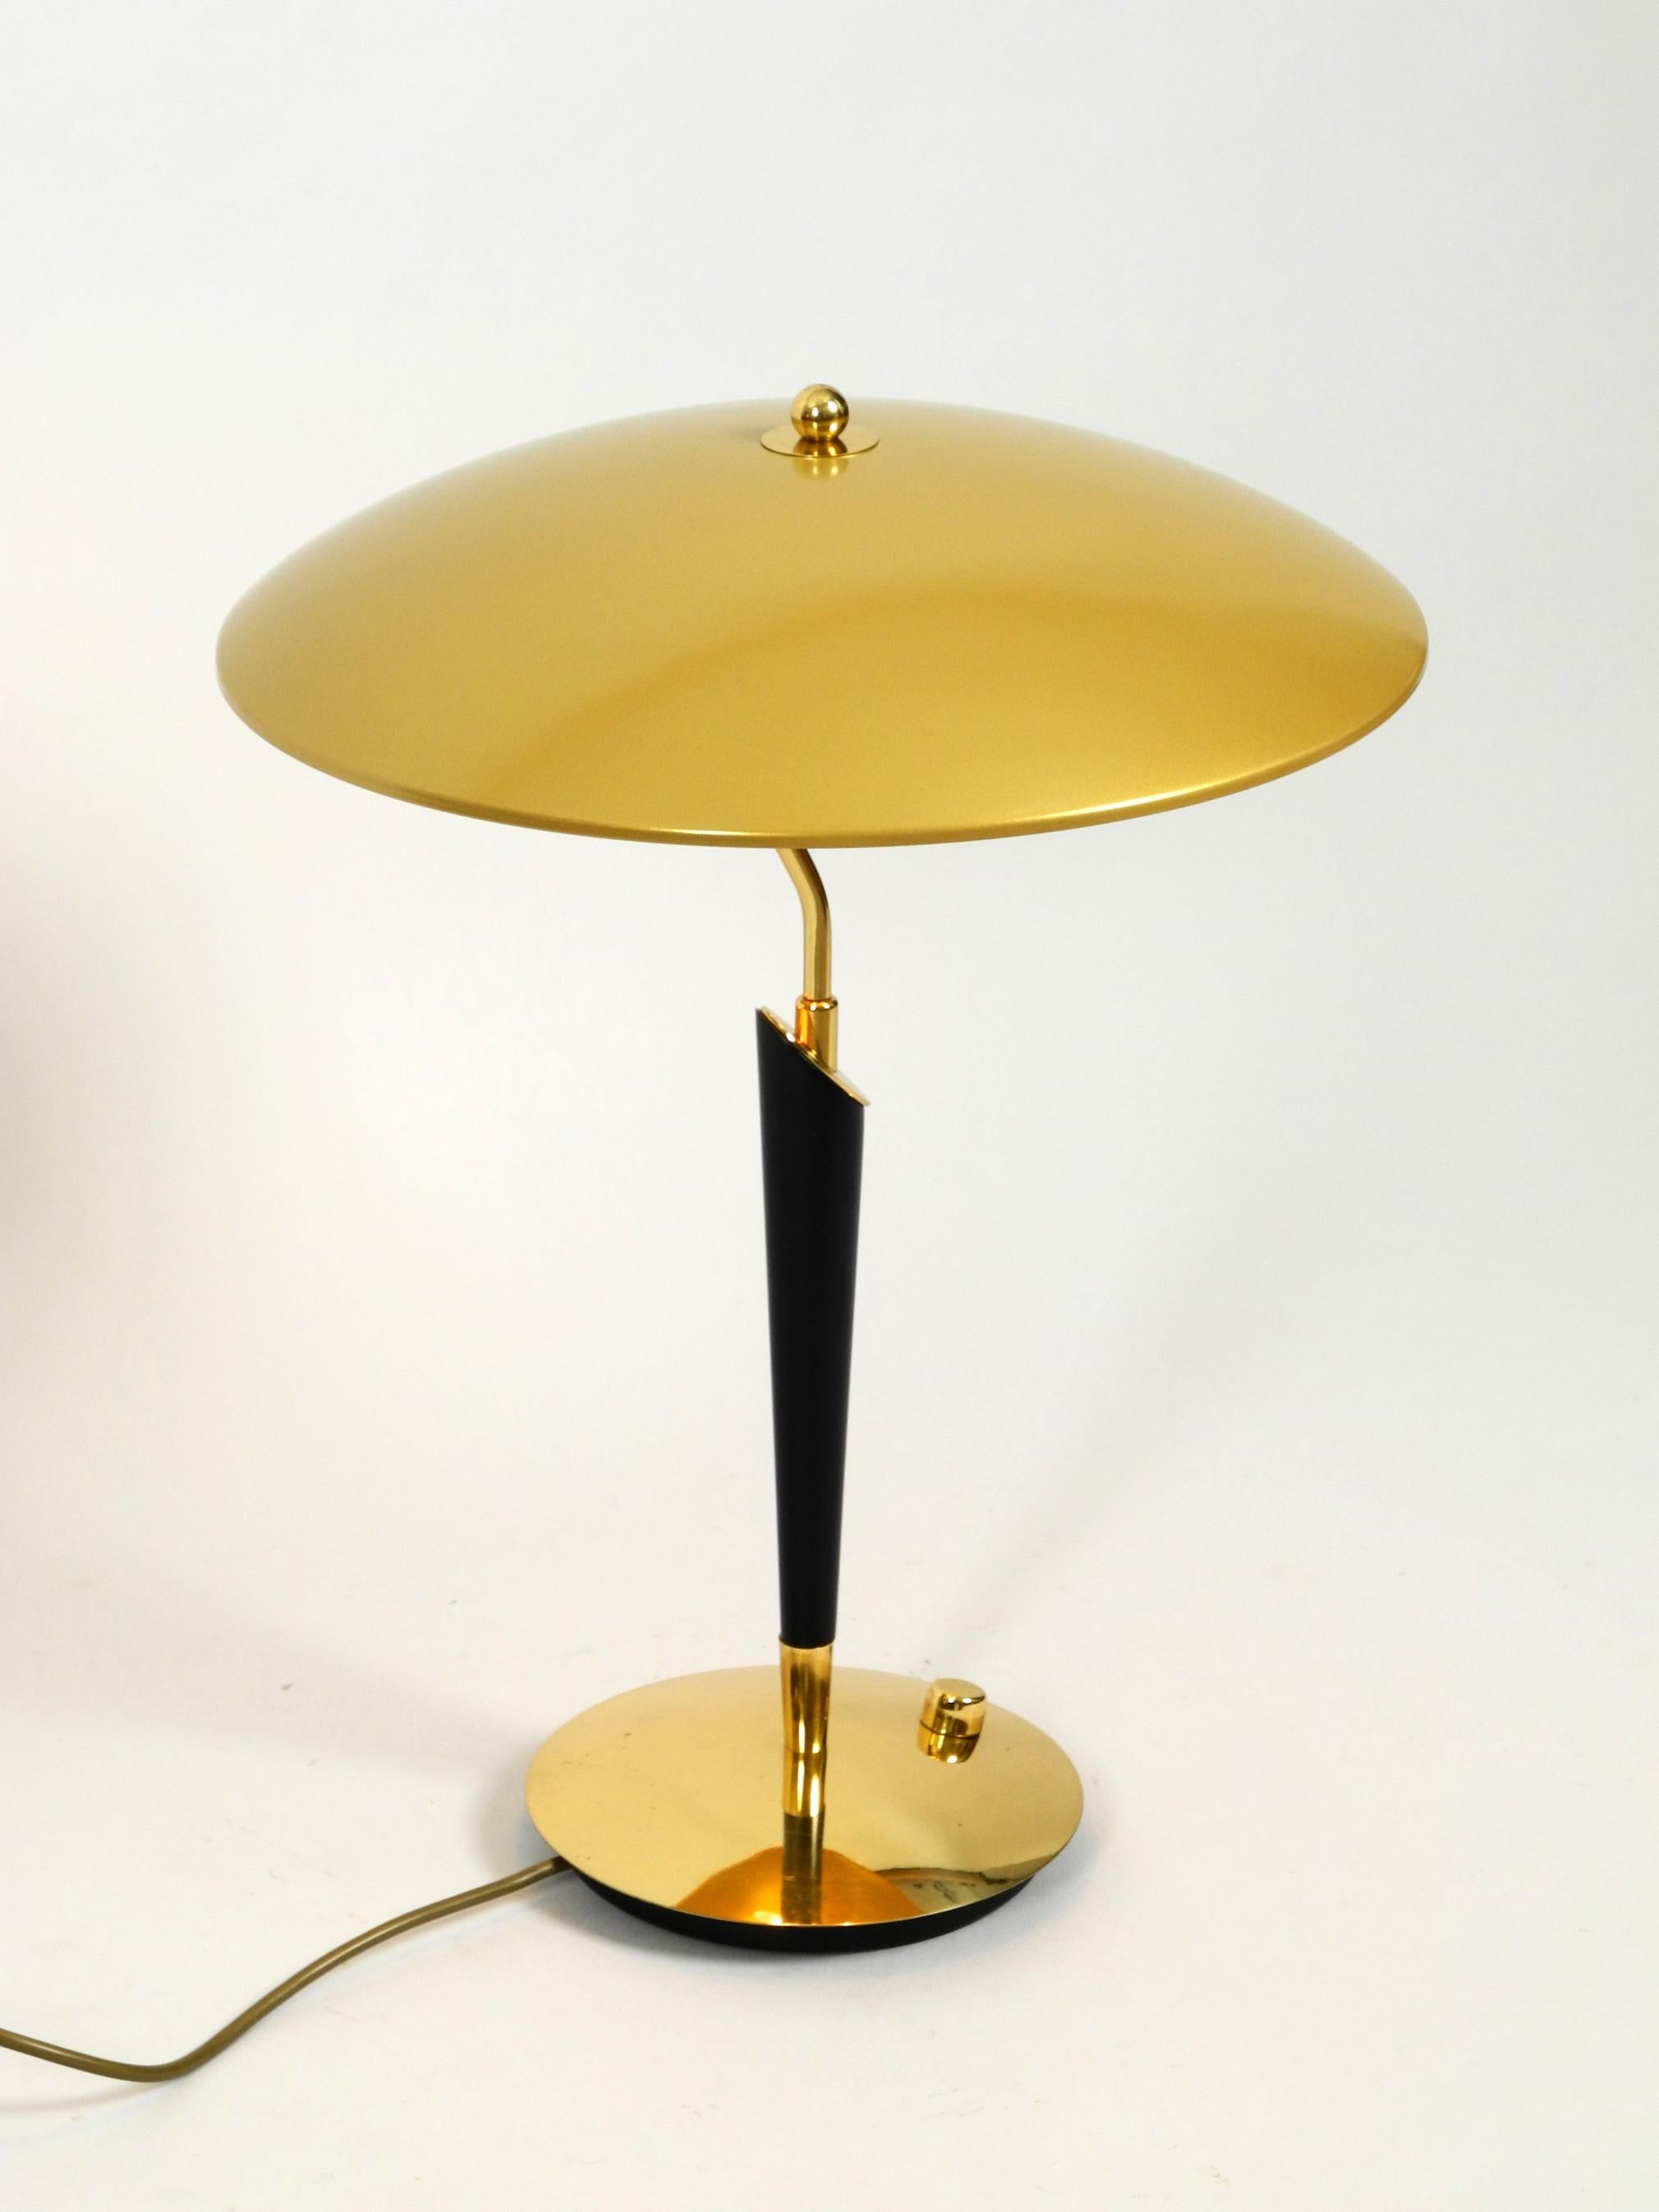 German Elegant Heavy Extra Large Brass Table Lamp from the 1960s by Hillebrand